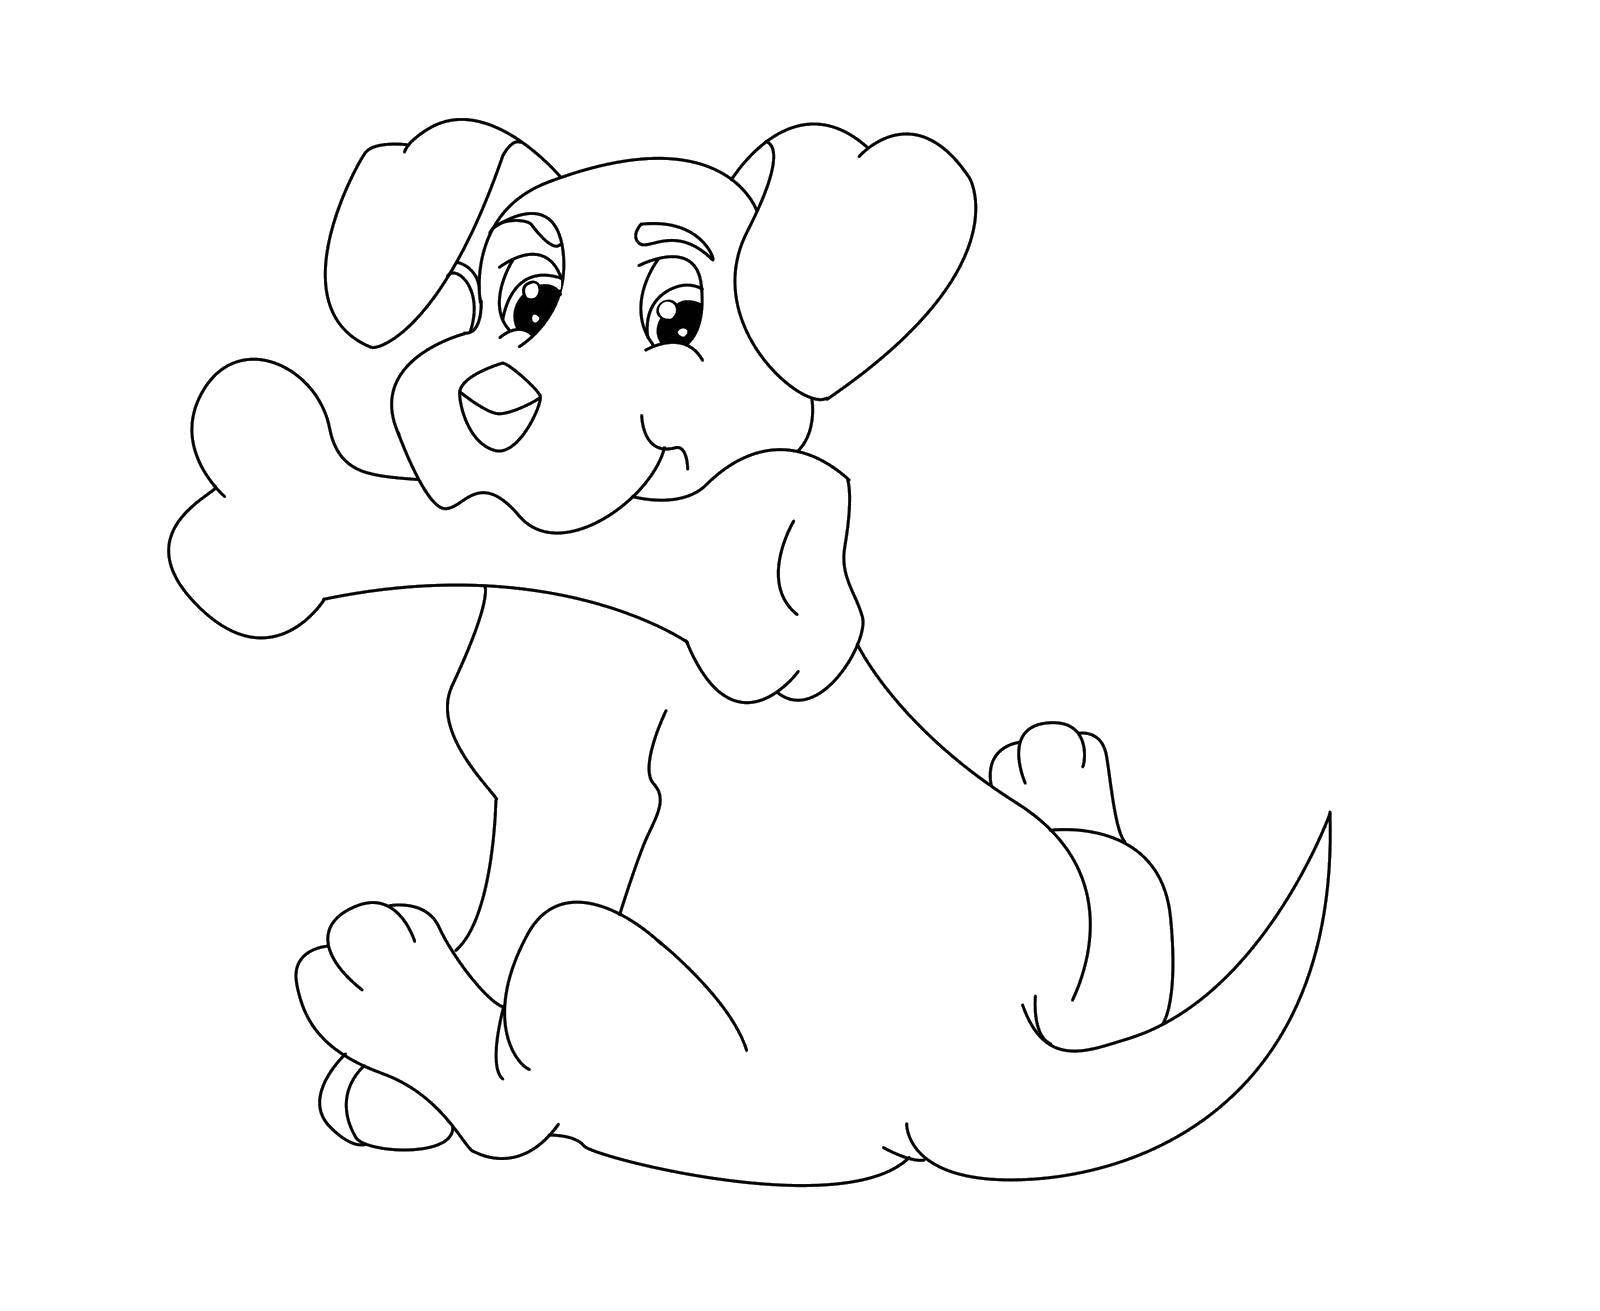 Coloring Loves bones. Category Animals. Tags:  Animals, dog.